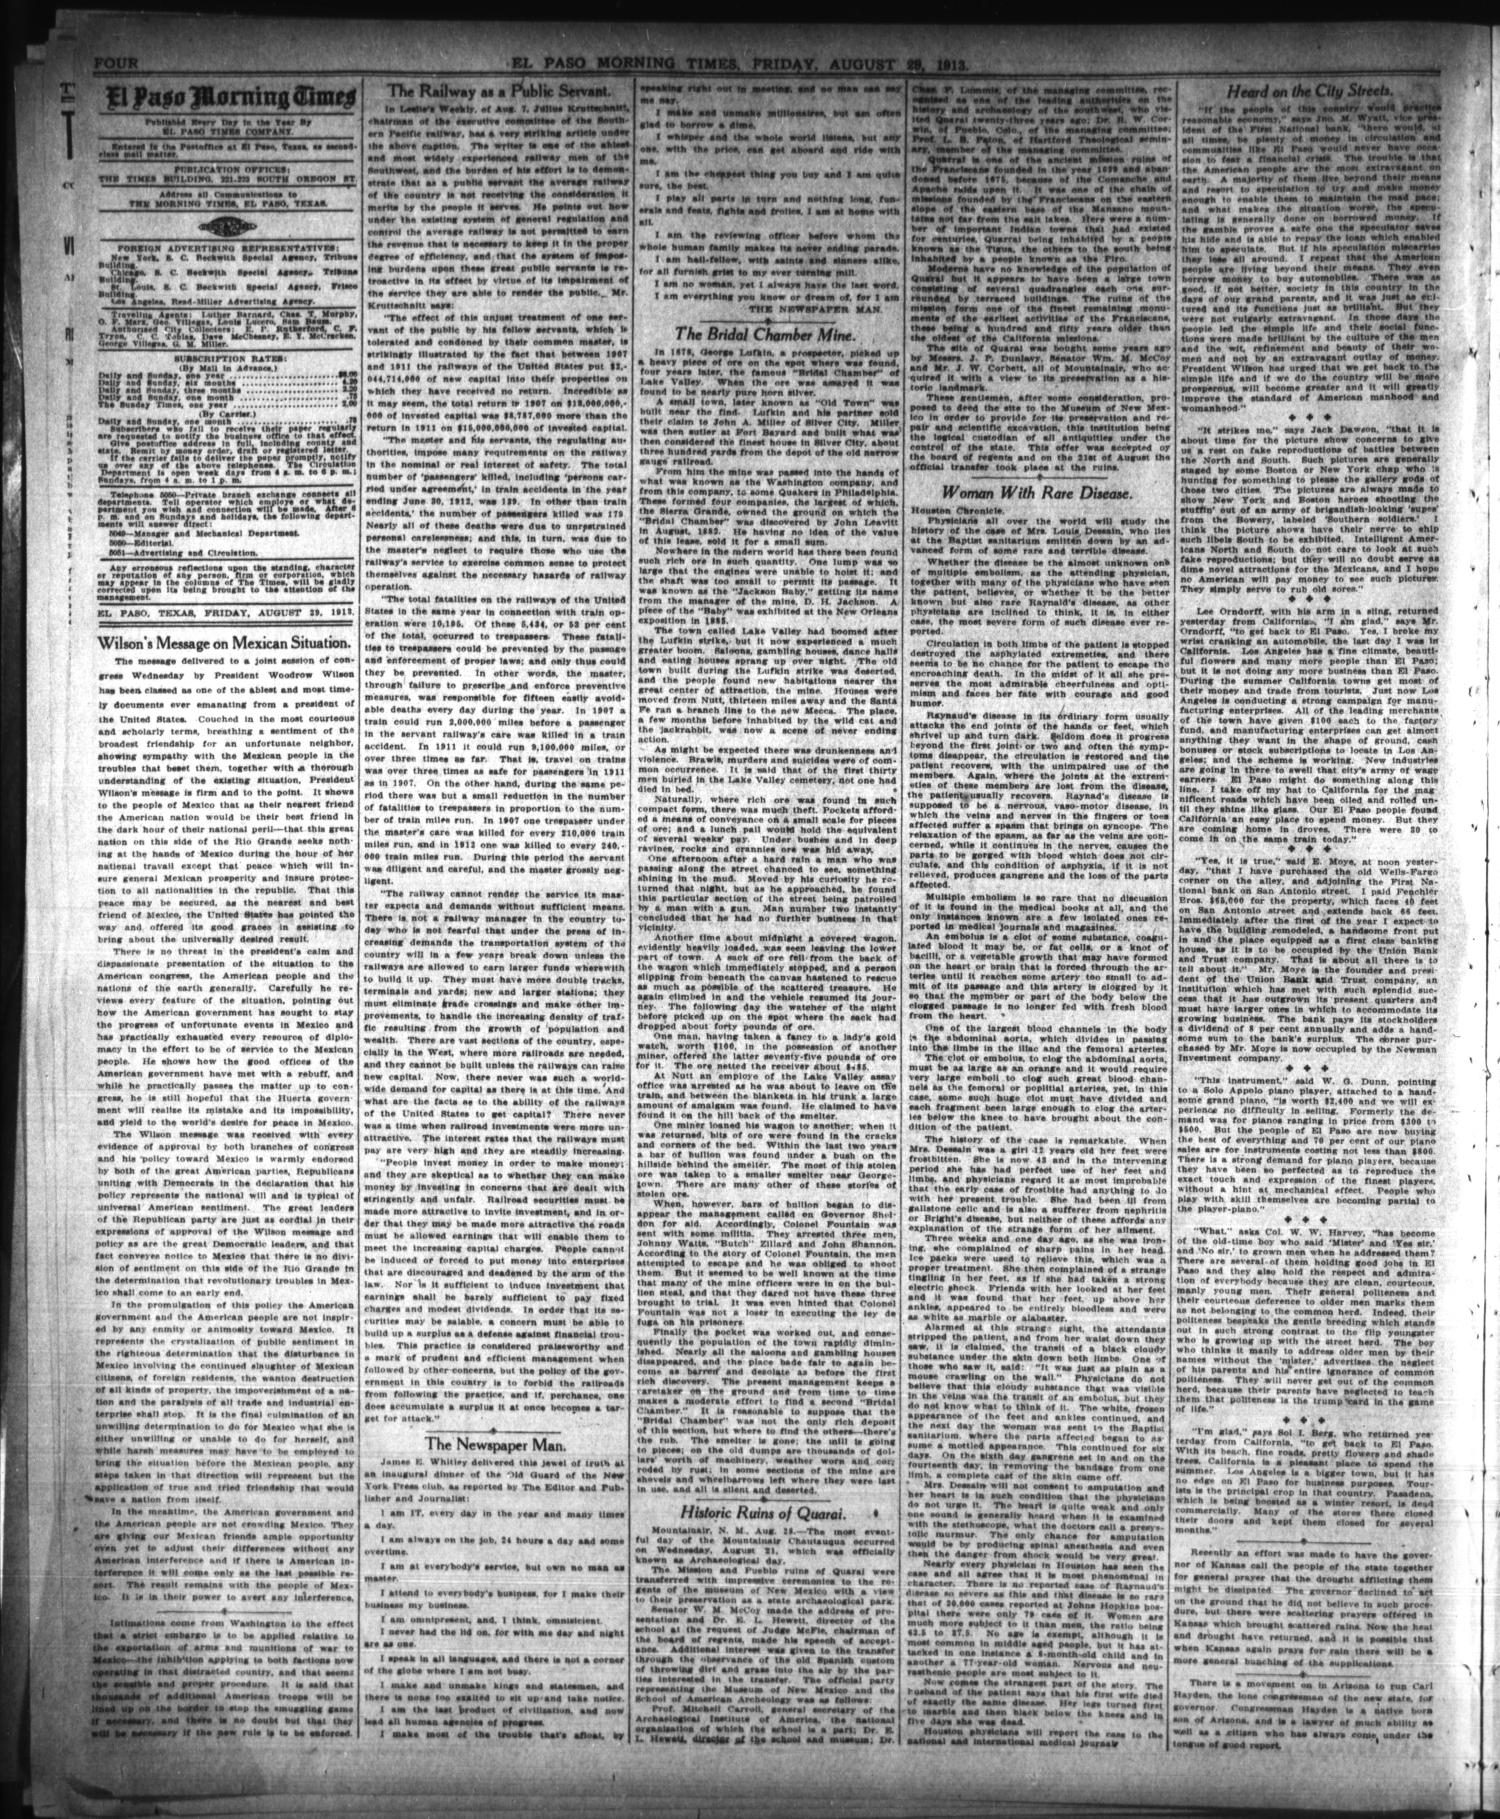 El Paso Morning Times (El Paso, Tex.), Vol. 34TH YEAR, Ed. 1, Friday, August 29, 1913
                                                
                                                    [Sequence #]: 4 of 10
                                                